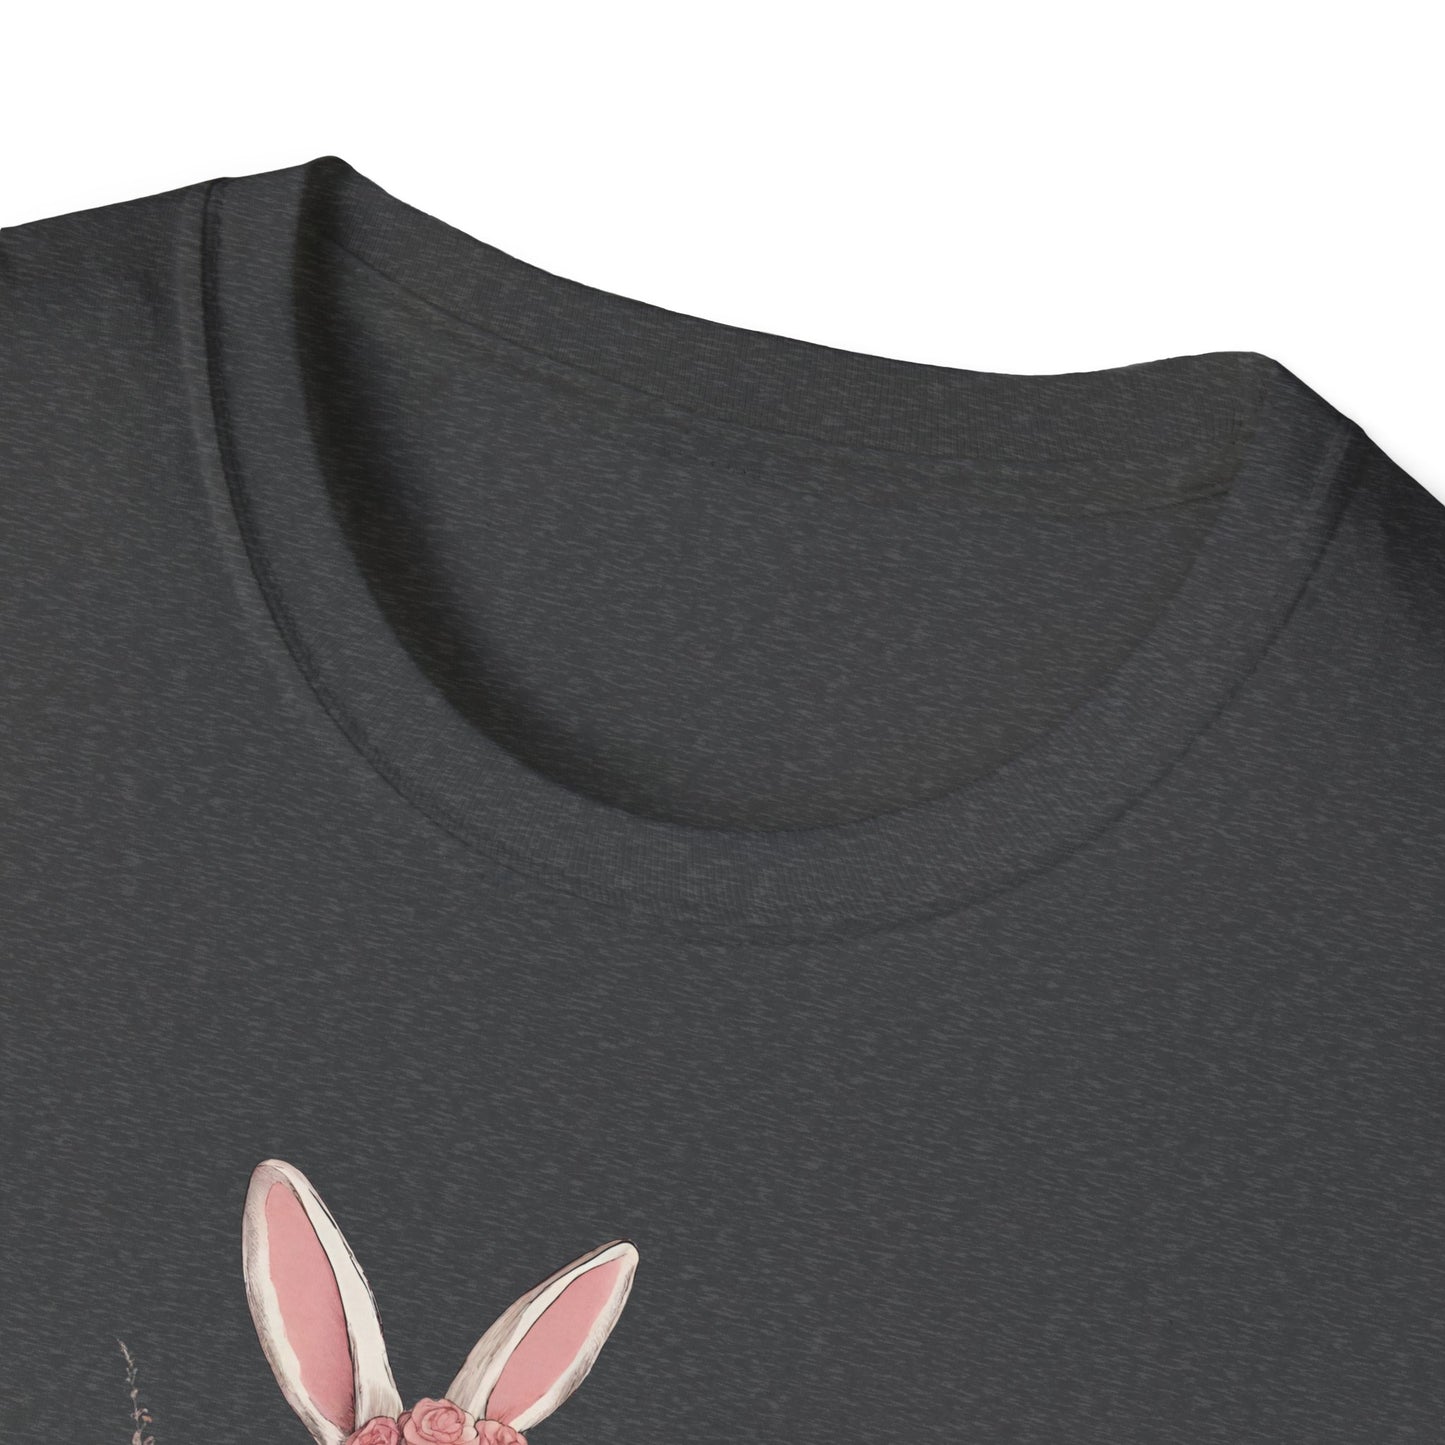 Cute Tshirt, Gift For Her, Cute Bunny, Trendy Crewneck, Coquette Tee, Bunny Cute Graphic, Vintage T-shirt